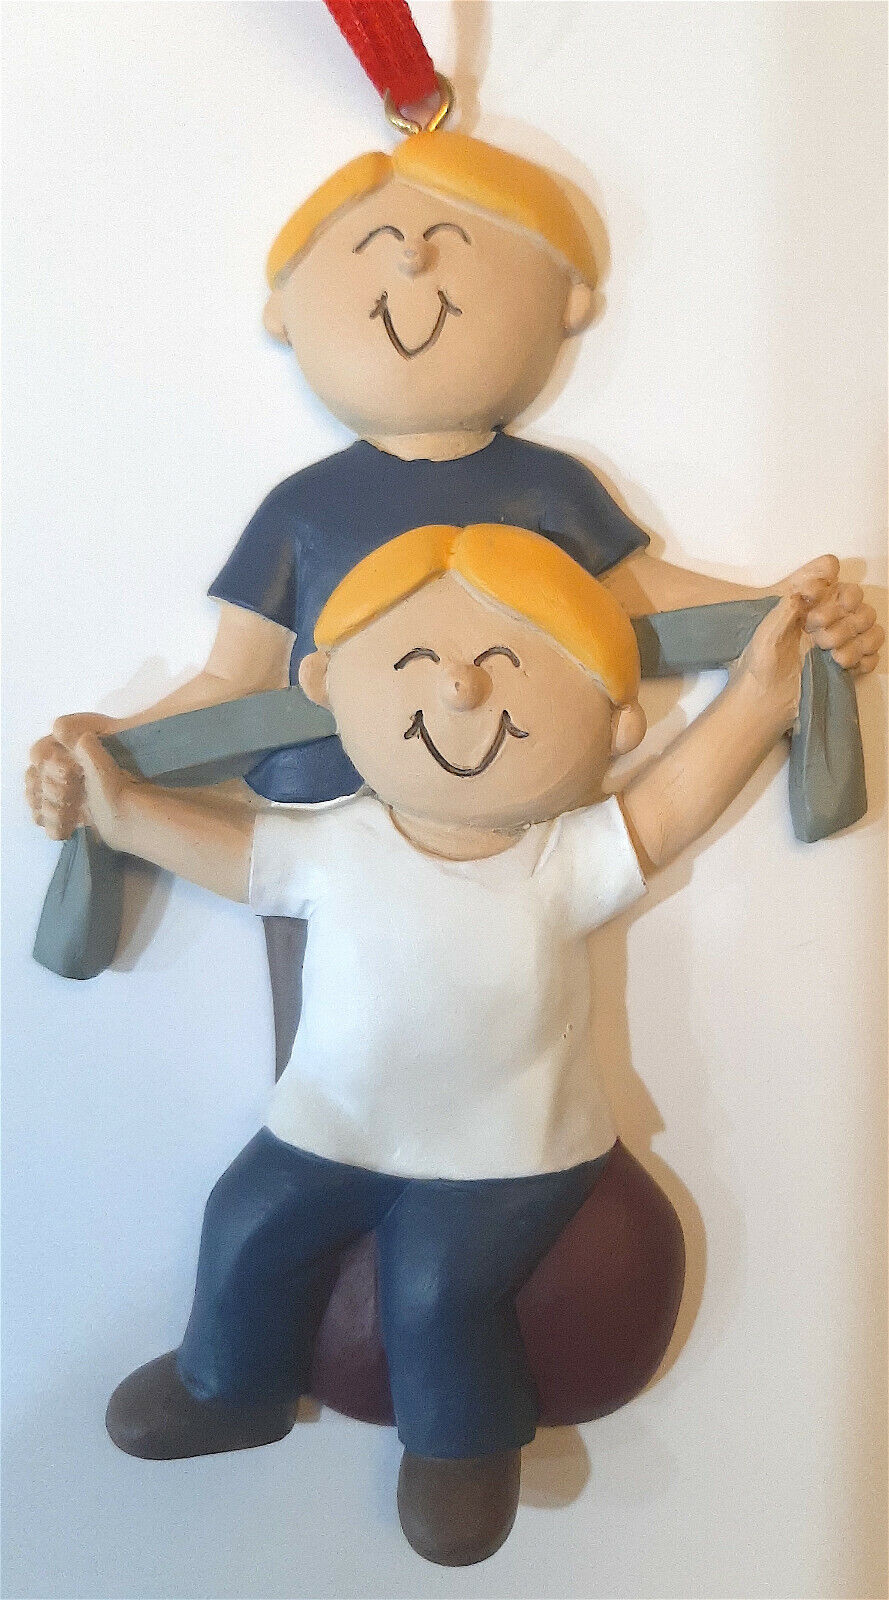 Male Occupational Physical Therapist Blond Chiropractor Patient Ornament Blonde